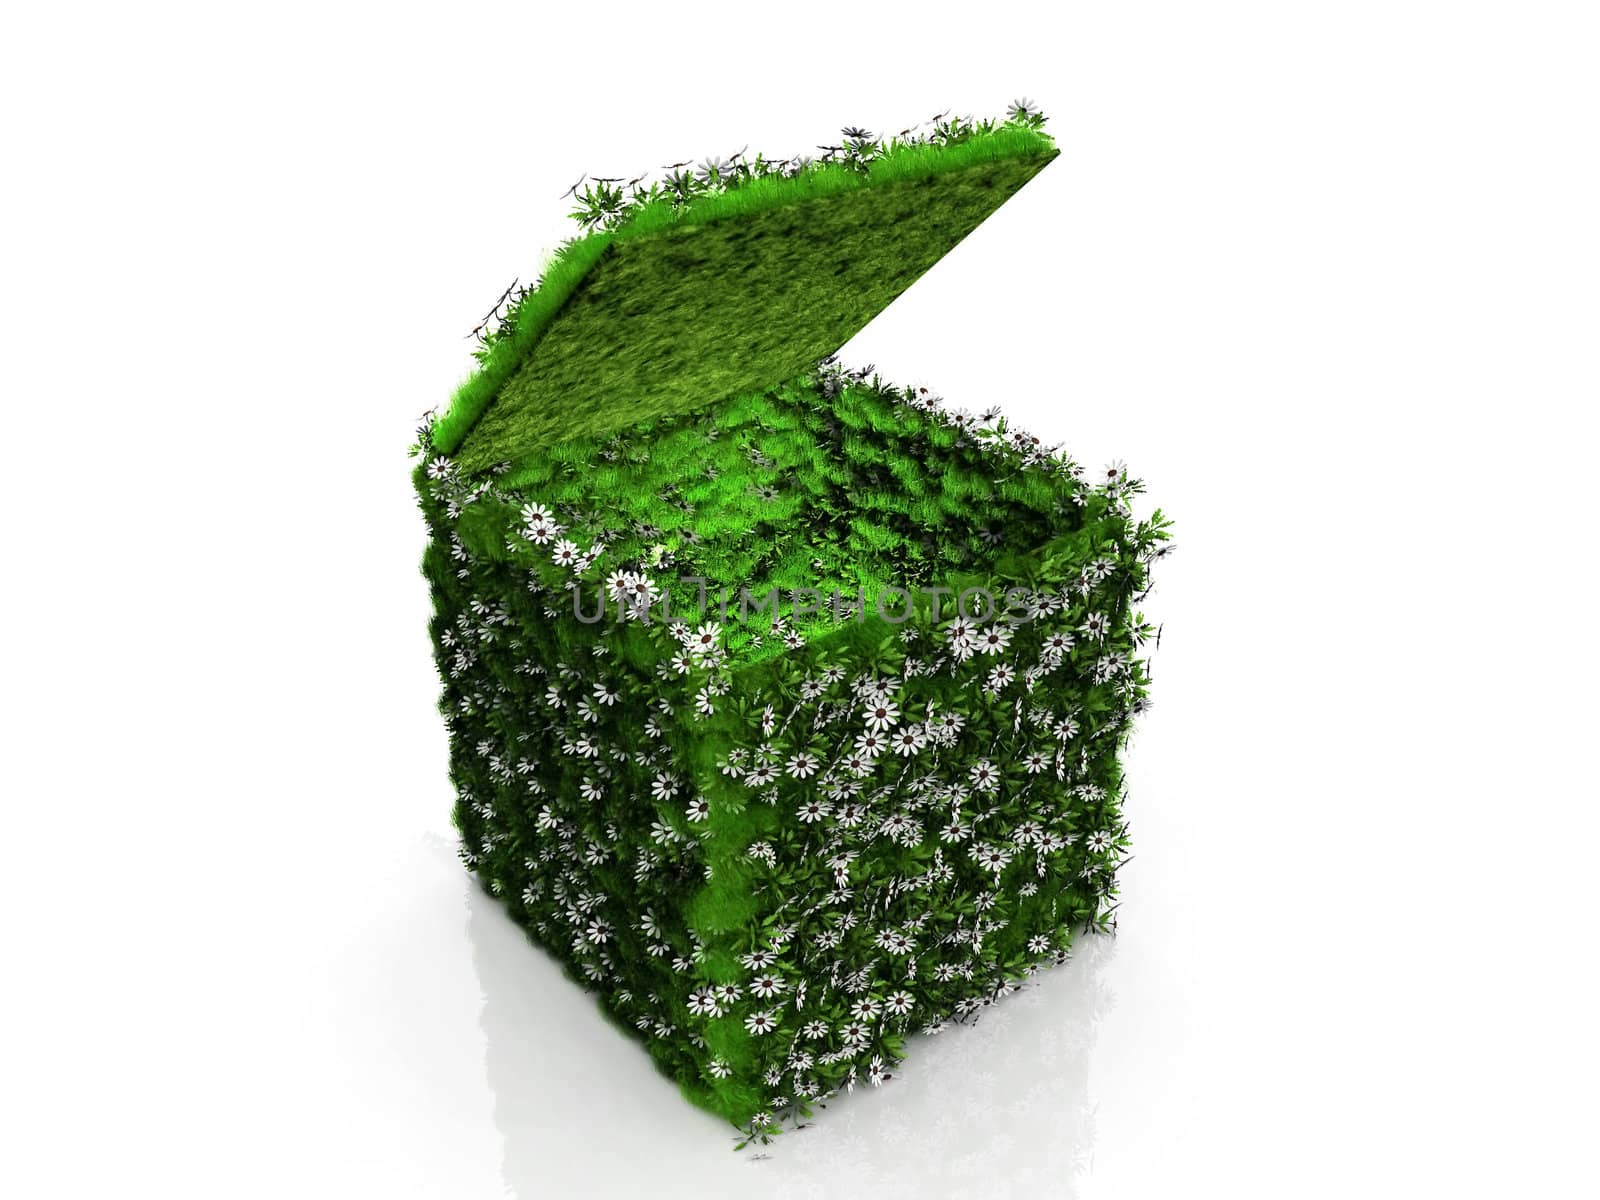 cube with grass and flowers by njaj